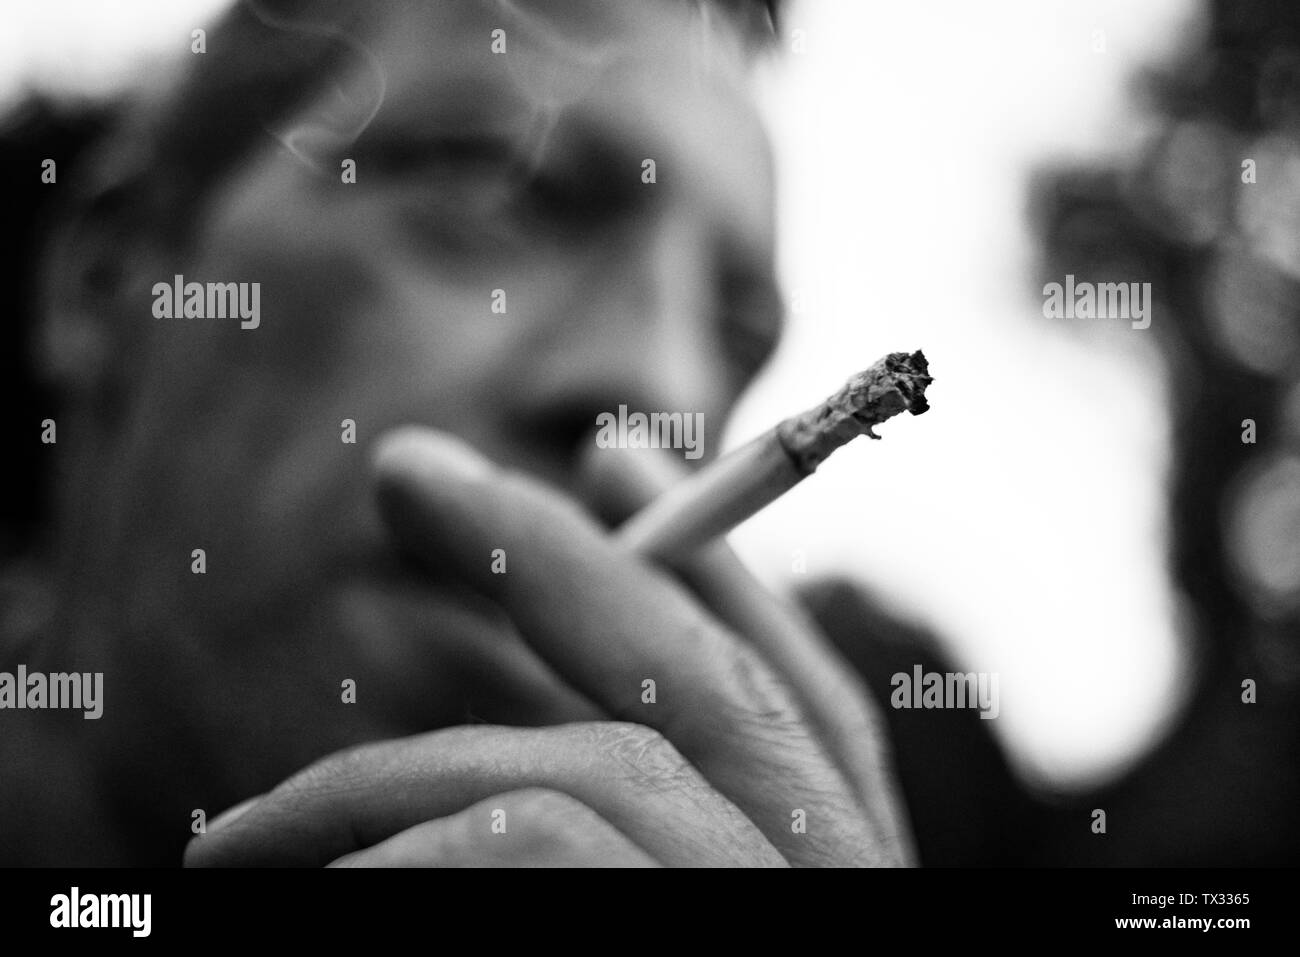 Stunning black and white close up of a man holding a cigarette in his hand and smoking it Stock Photo